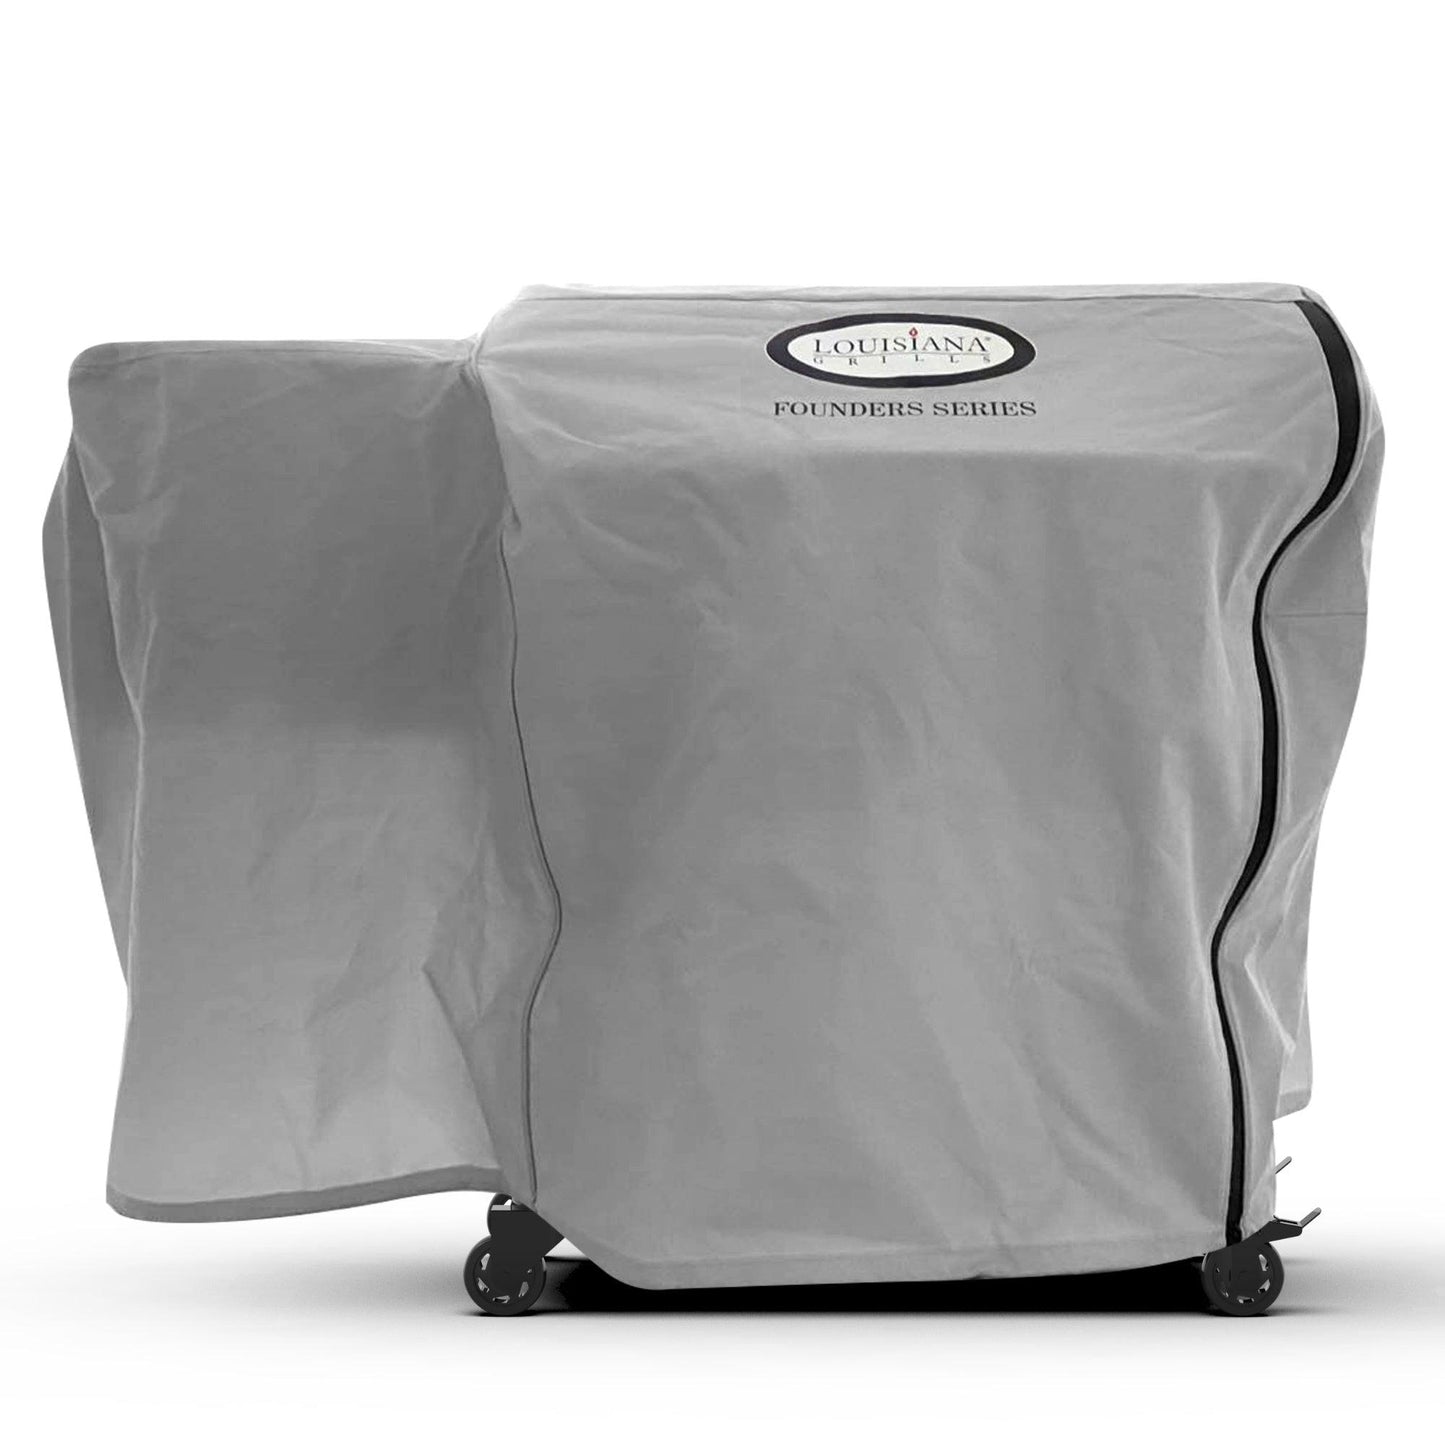 Raincover for Louisiana Grills 1200 Founders Pellet Grill - BBQ Land